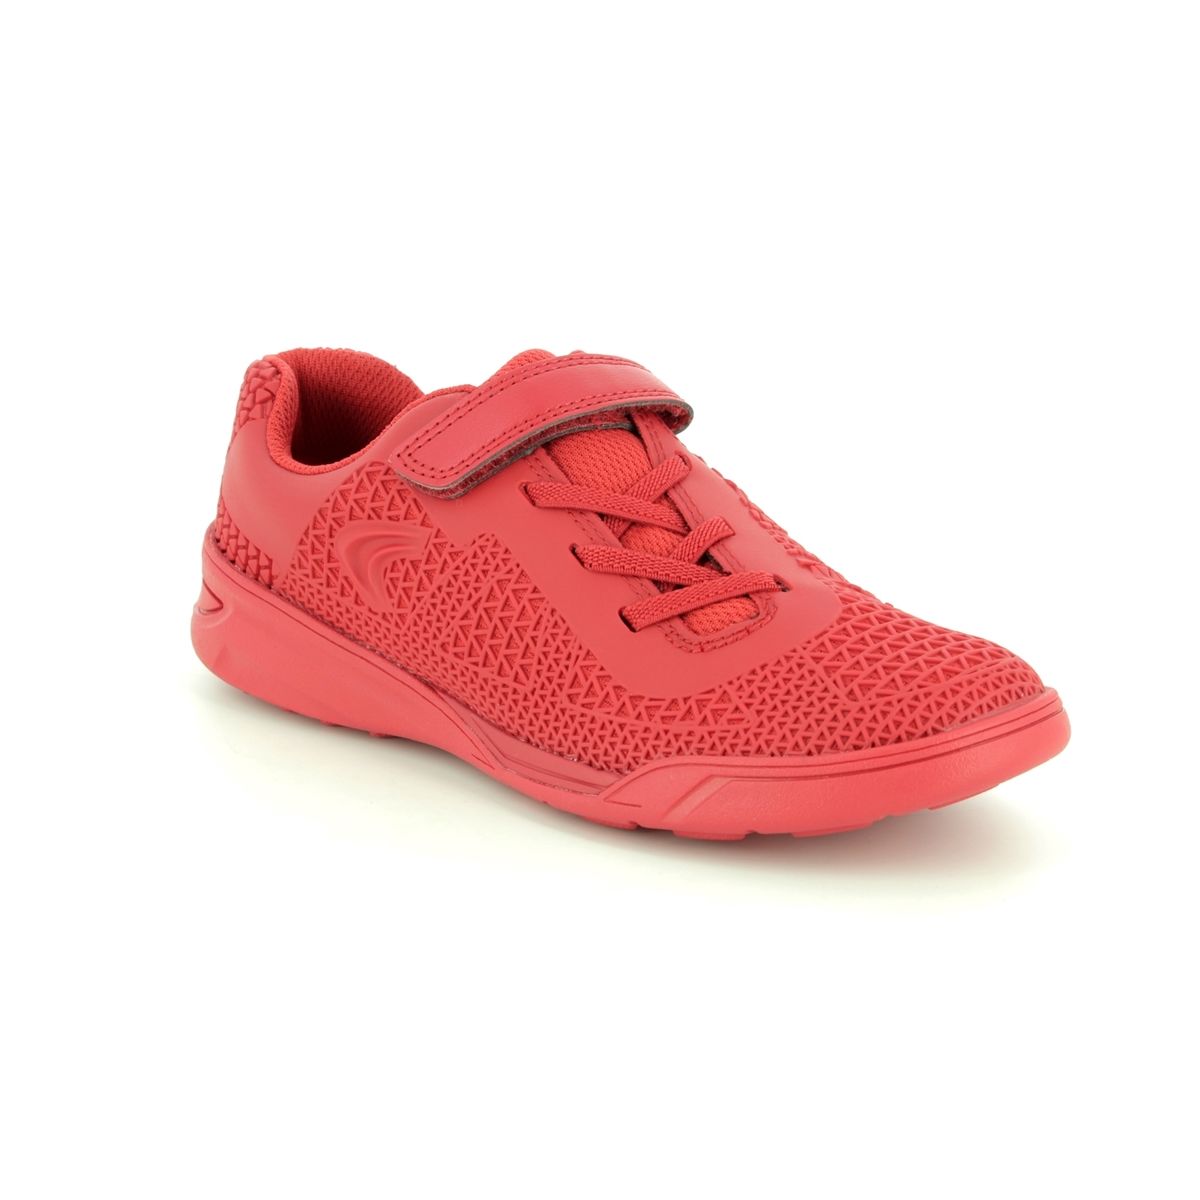 Clarks Award Blaze Inf F Fit Red trainers